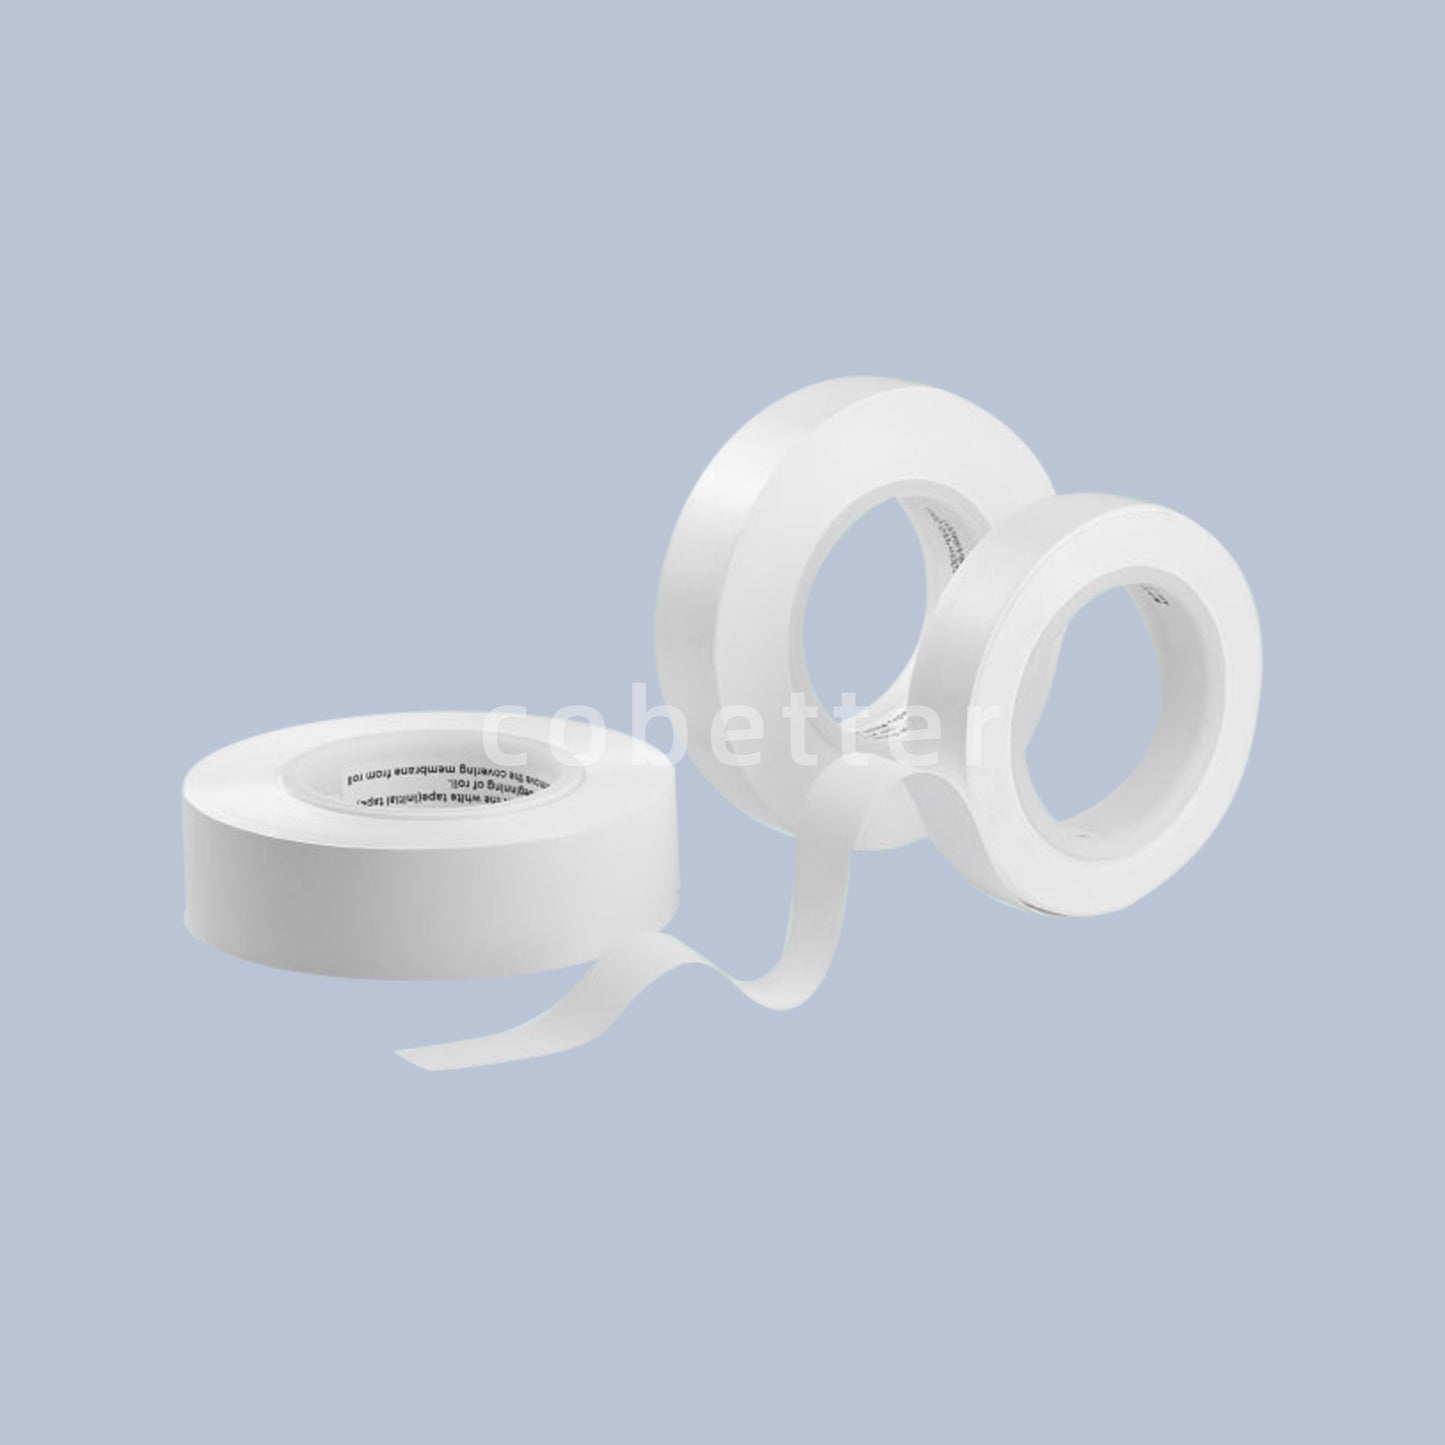 COBETTER NC140C Nitrocellulose (NC) Membrane for Lateral Flow Immunochromatography Tests